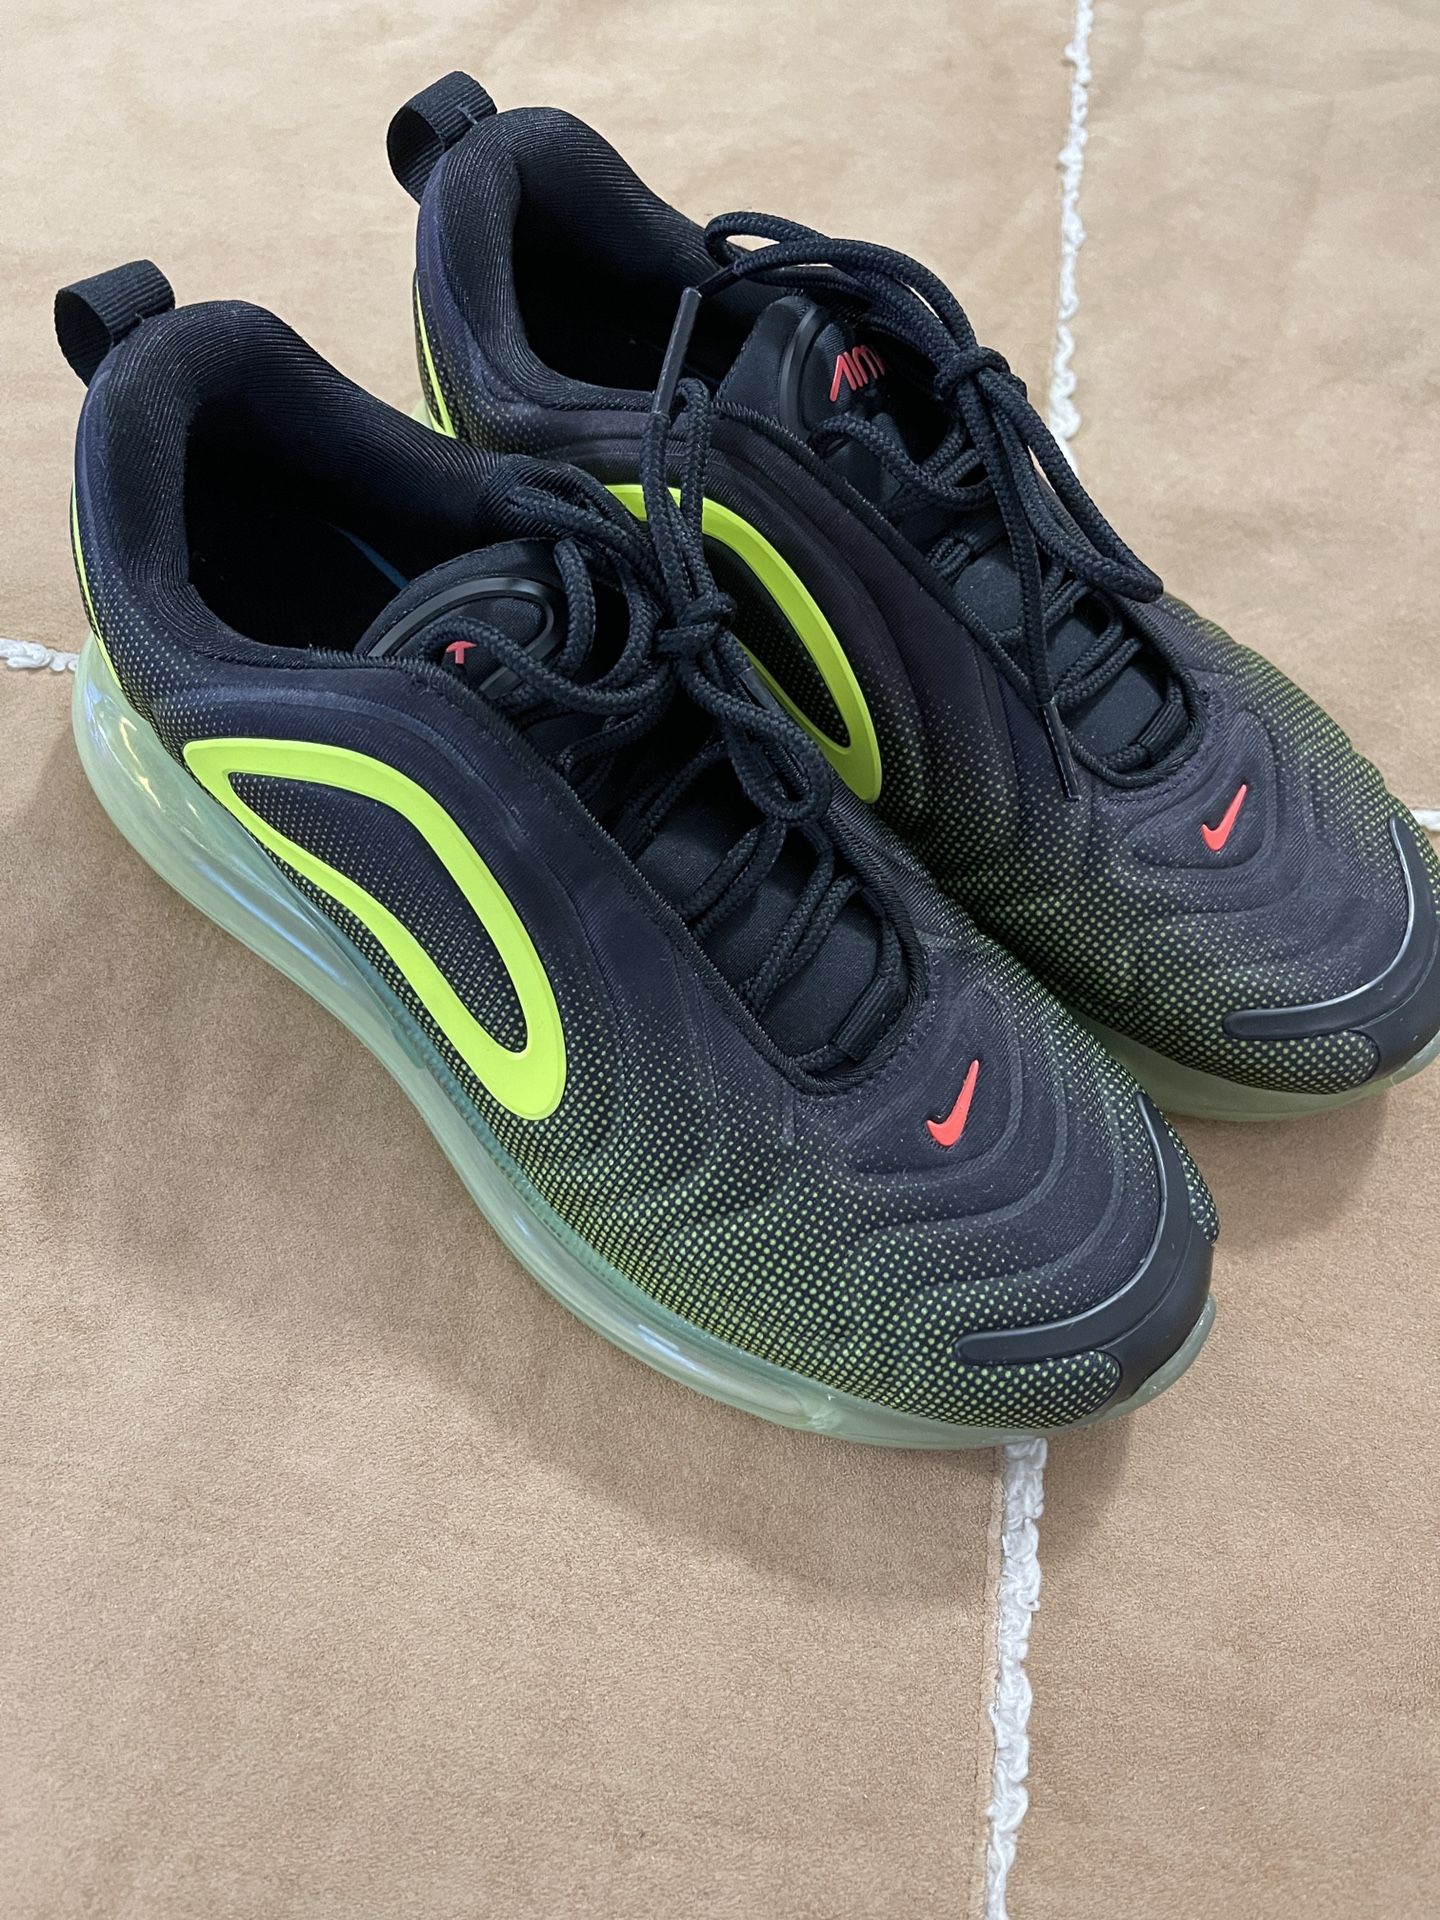 Nike Air max 720 Pink Sea 9.5 for Sale in New York, NY - OfferUp